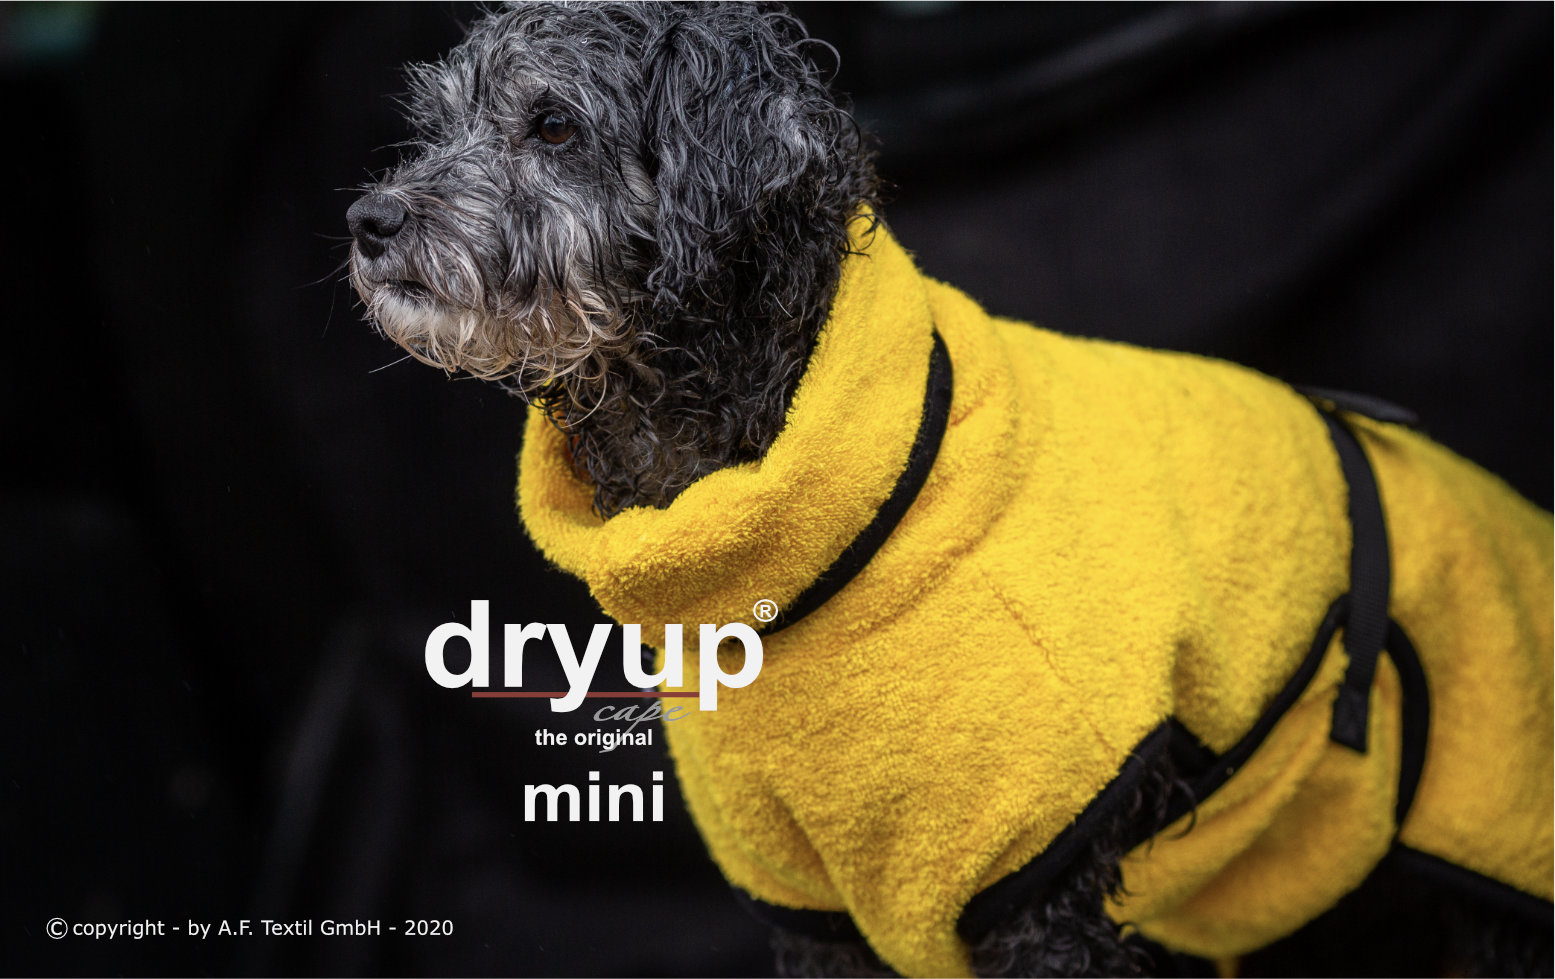 DRYUP cape YELLOW Mini Limited Edition